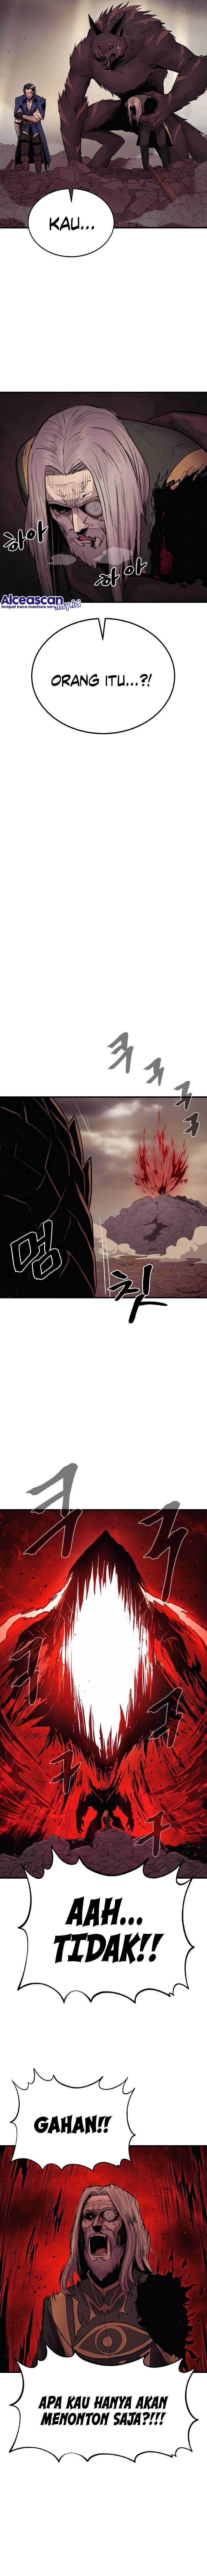 Howling dragon Chapter 30